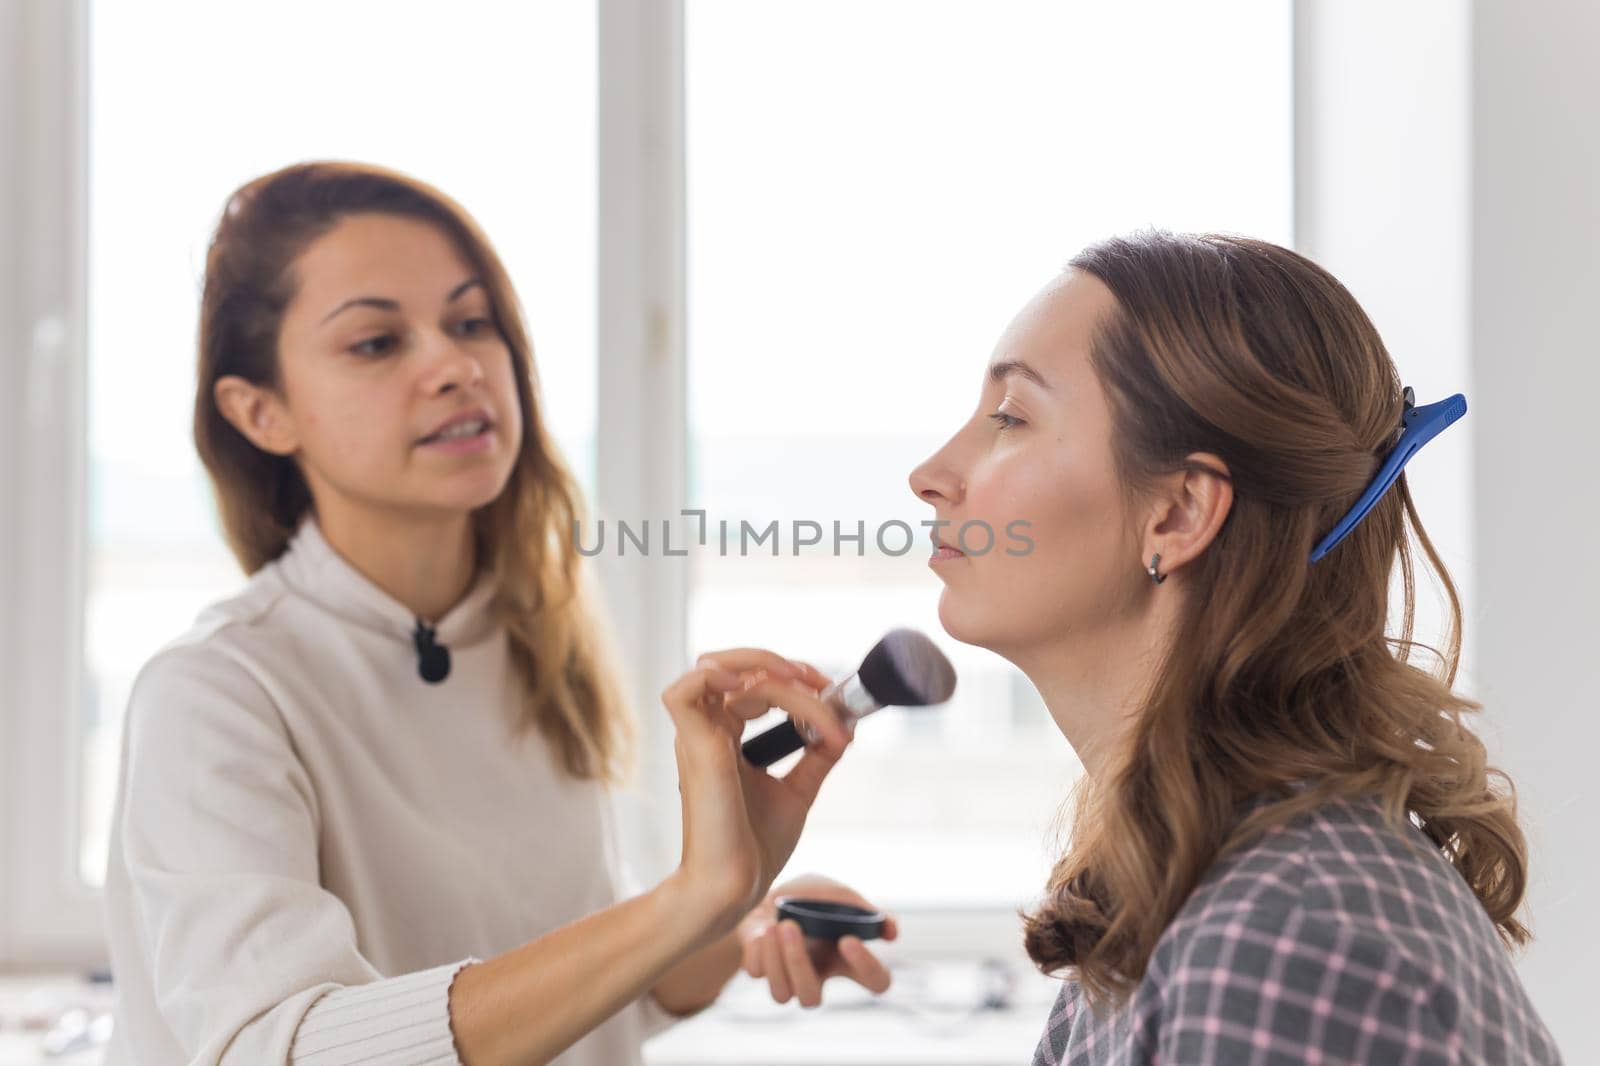 Beauty and cosmetics concept - Makeup artist doing professional make up of young woman.